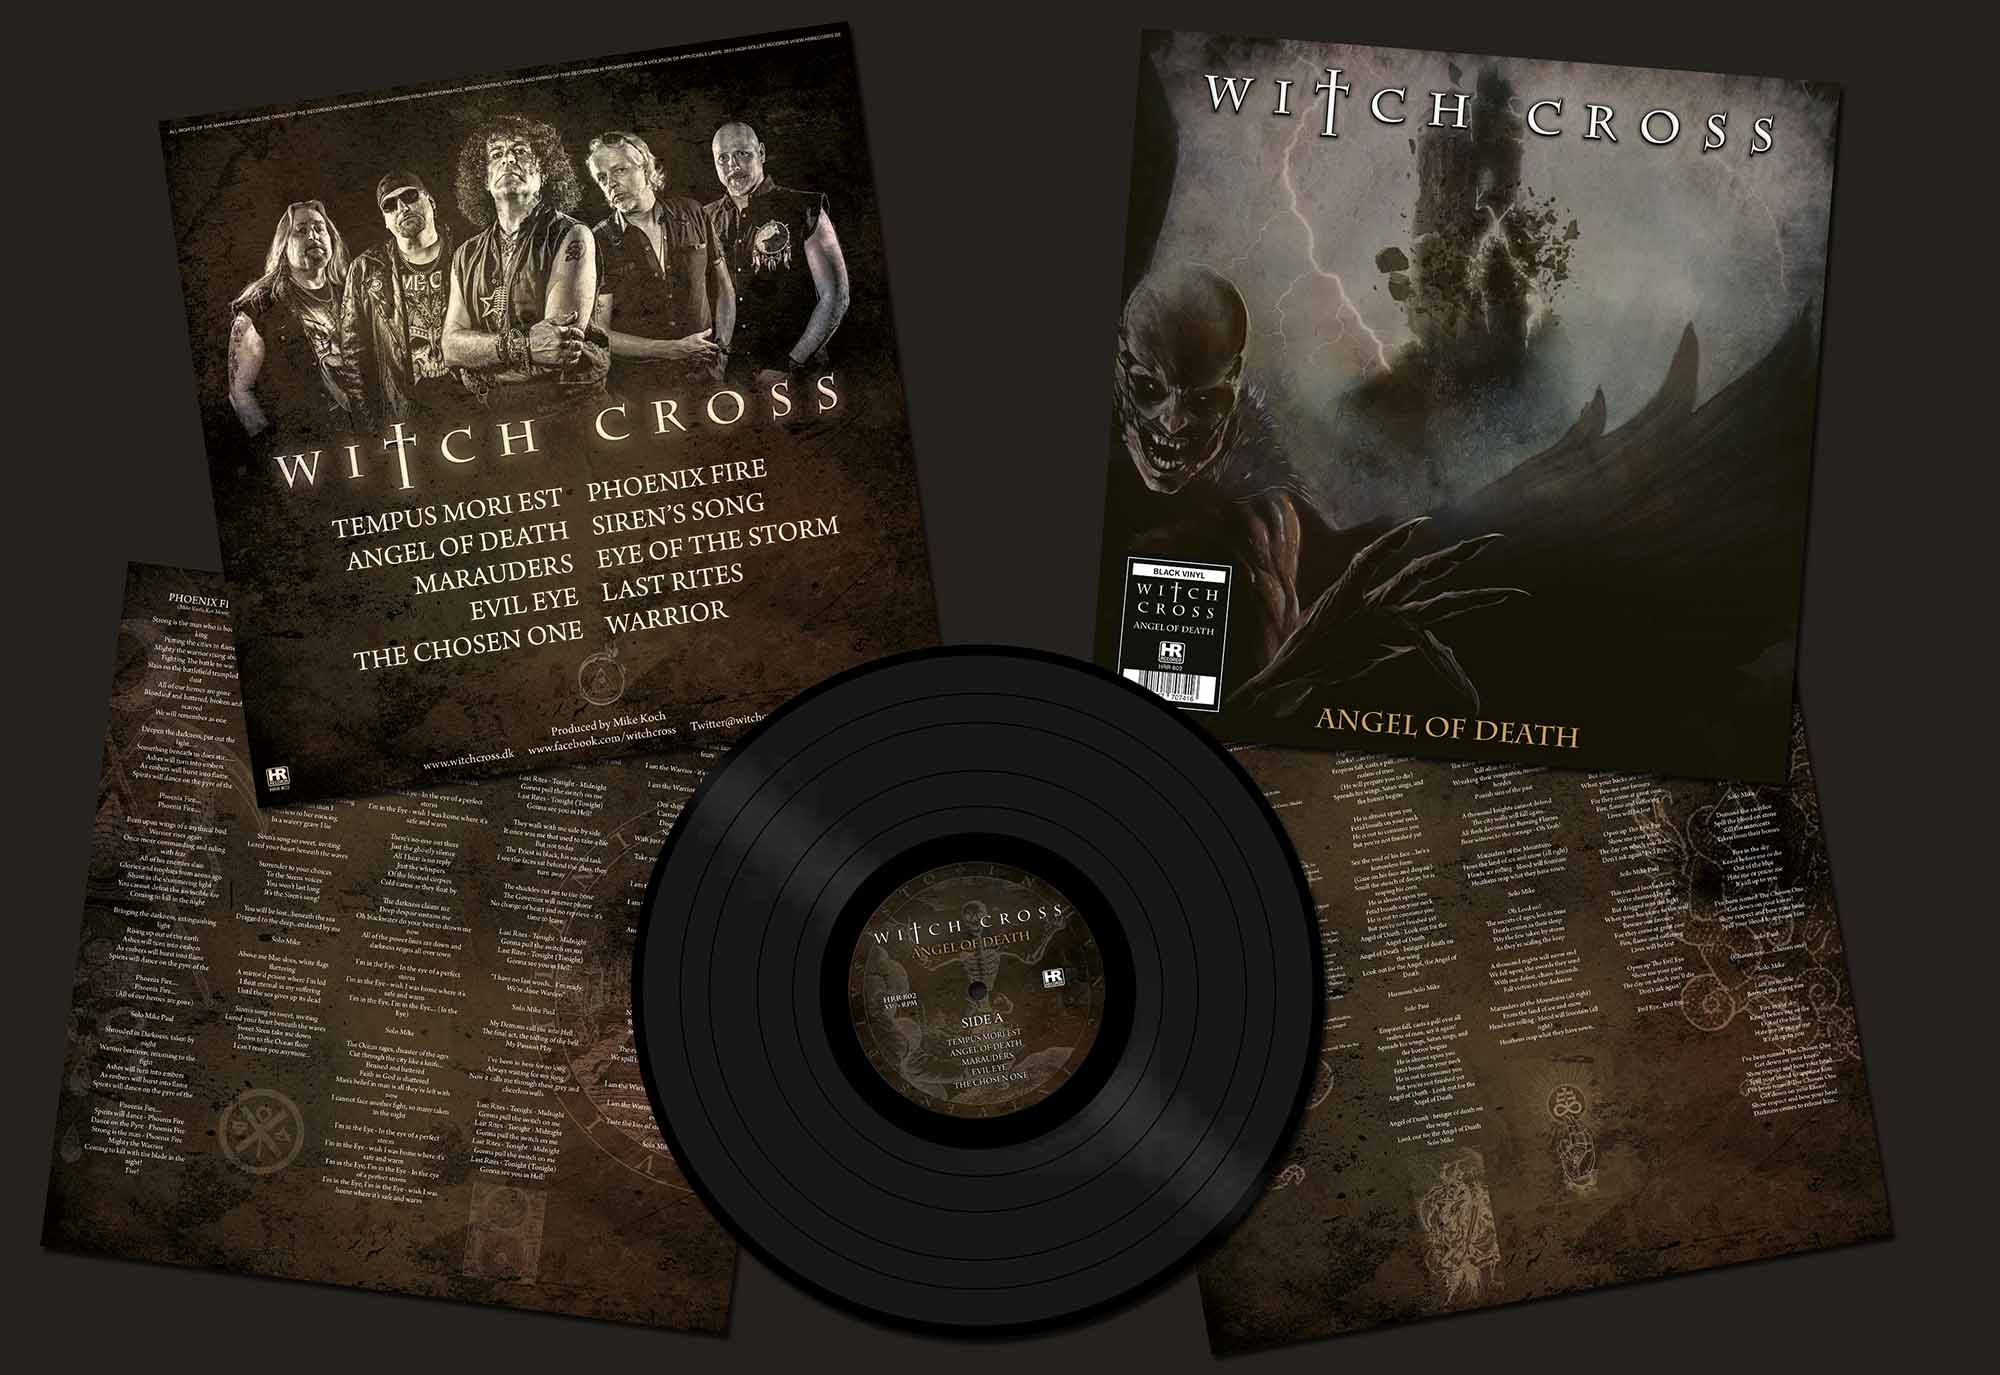 WITCH CROSS - Angel of Death  LP